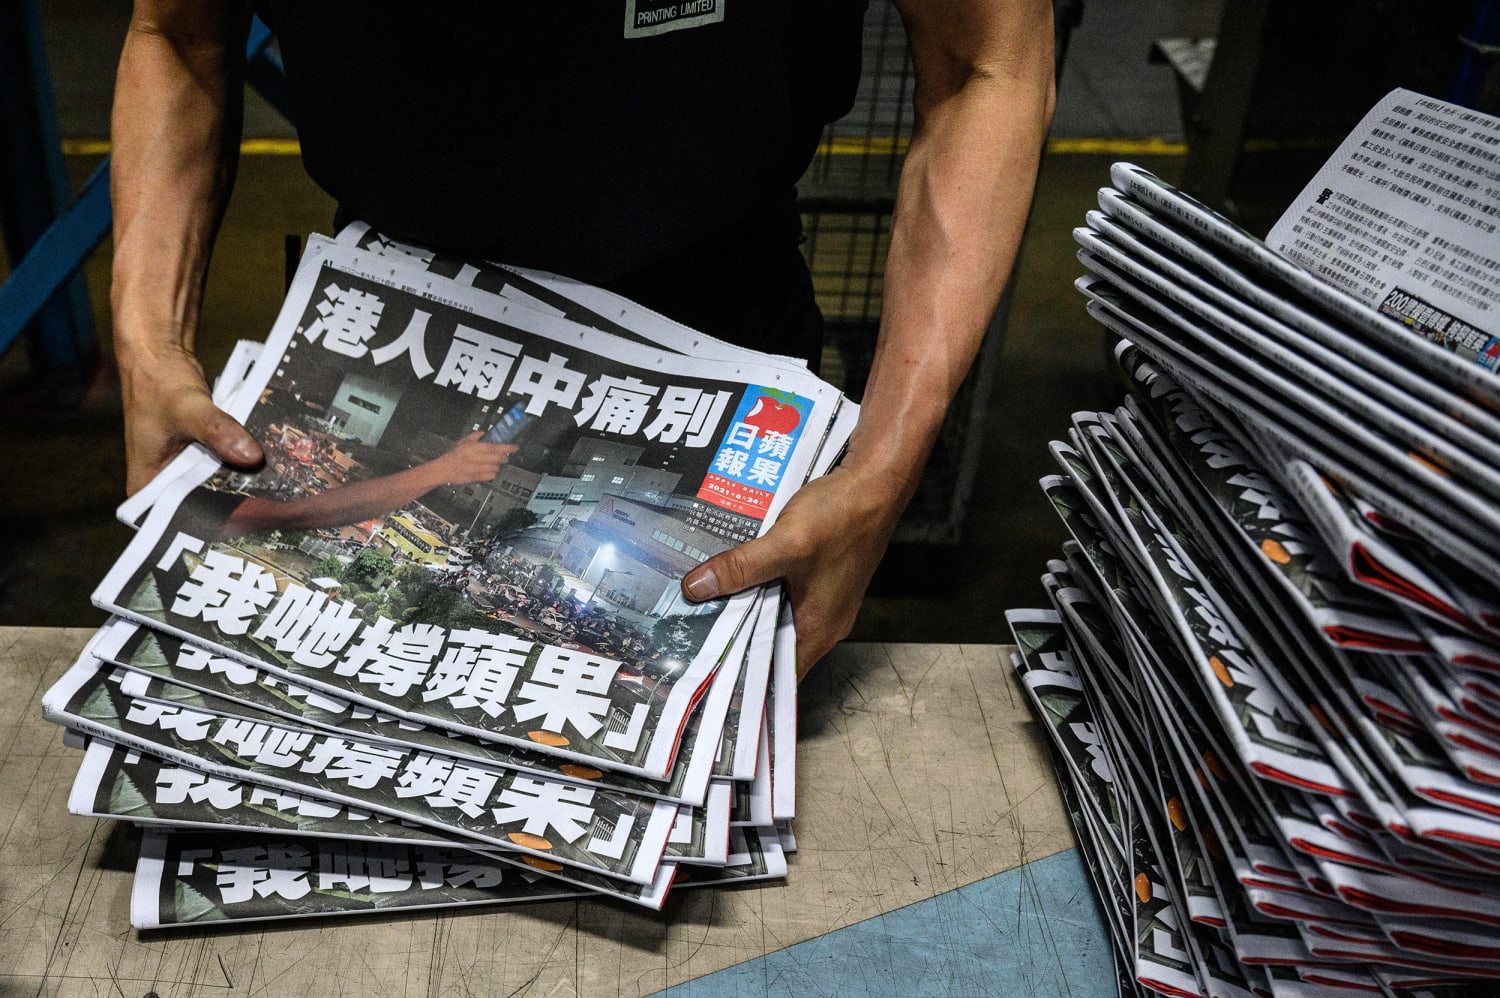 hong kong's pro-democracy newspaper apple daily closes with 'painful farewell'